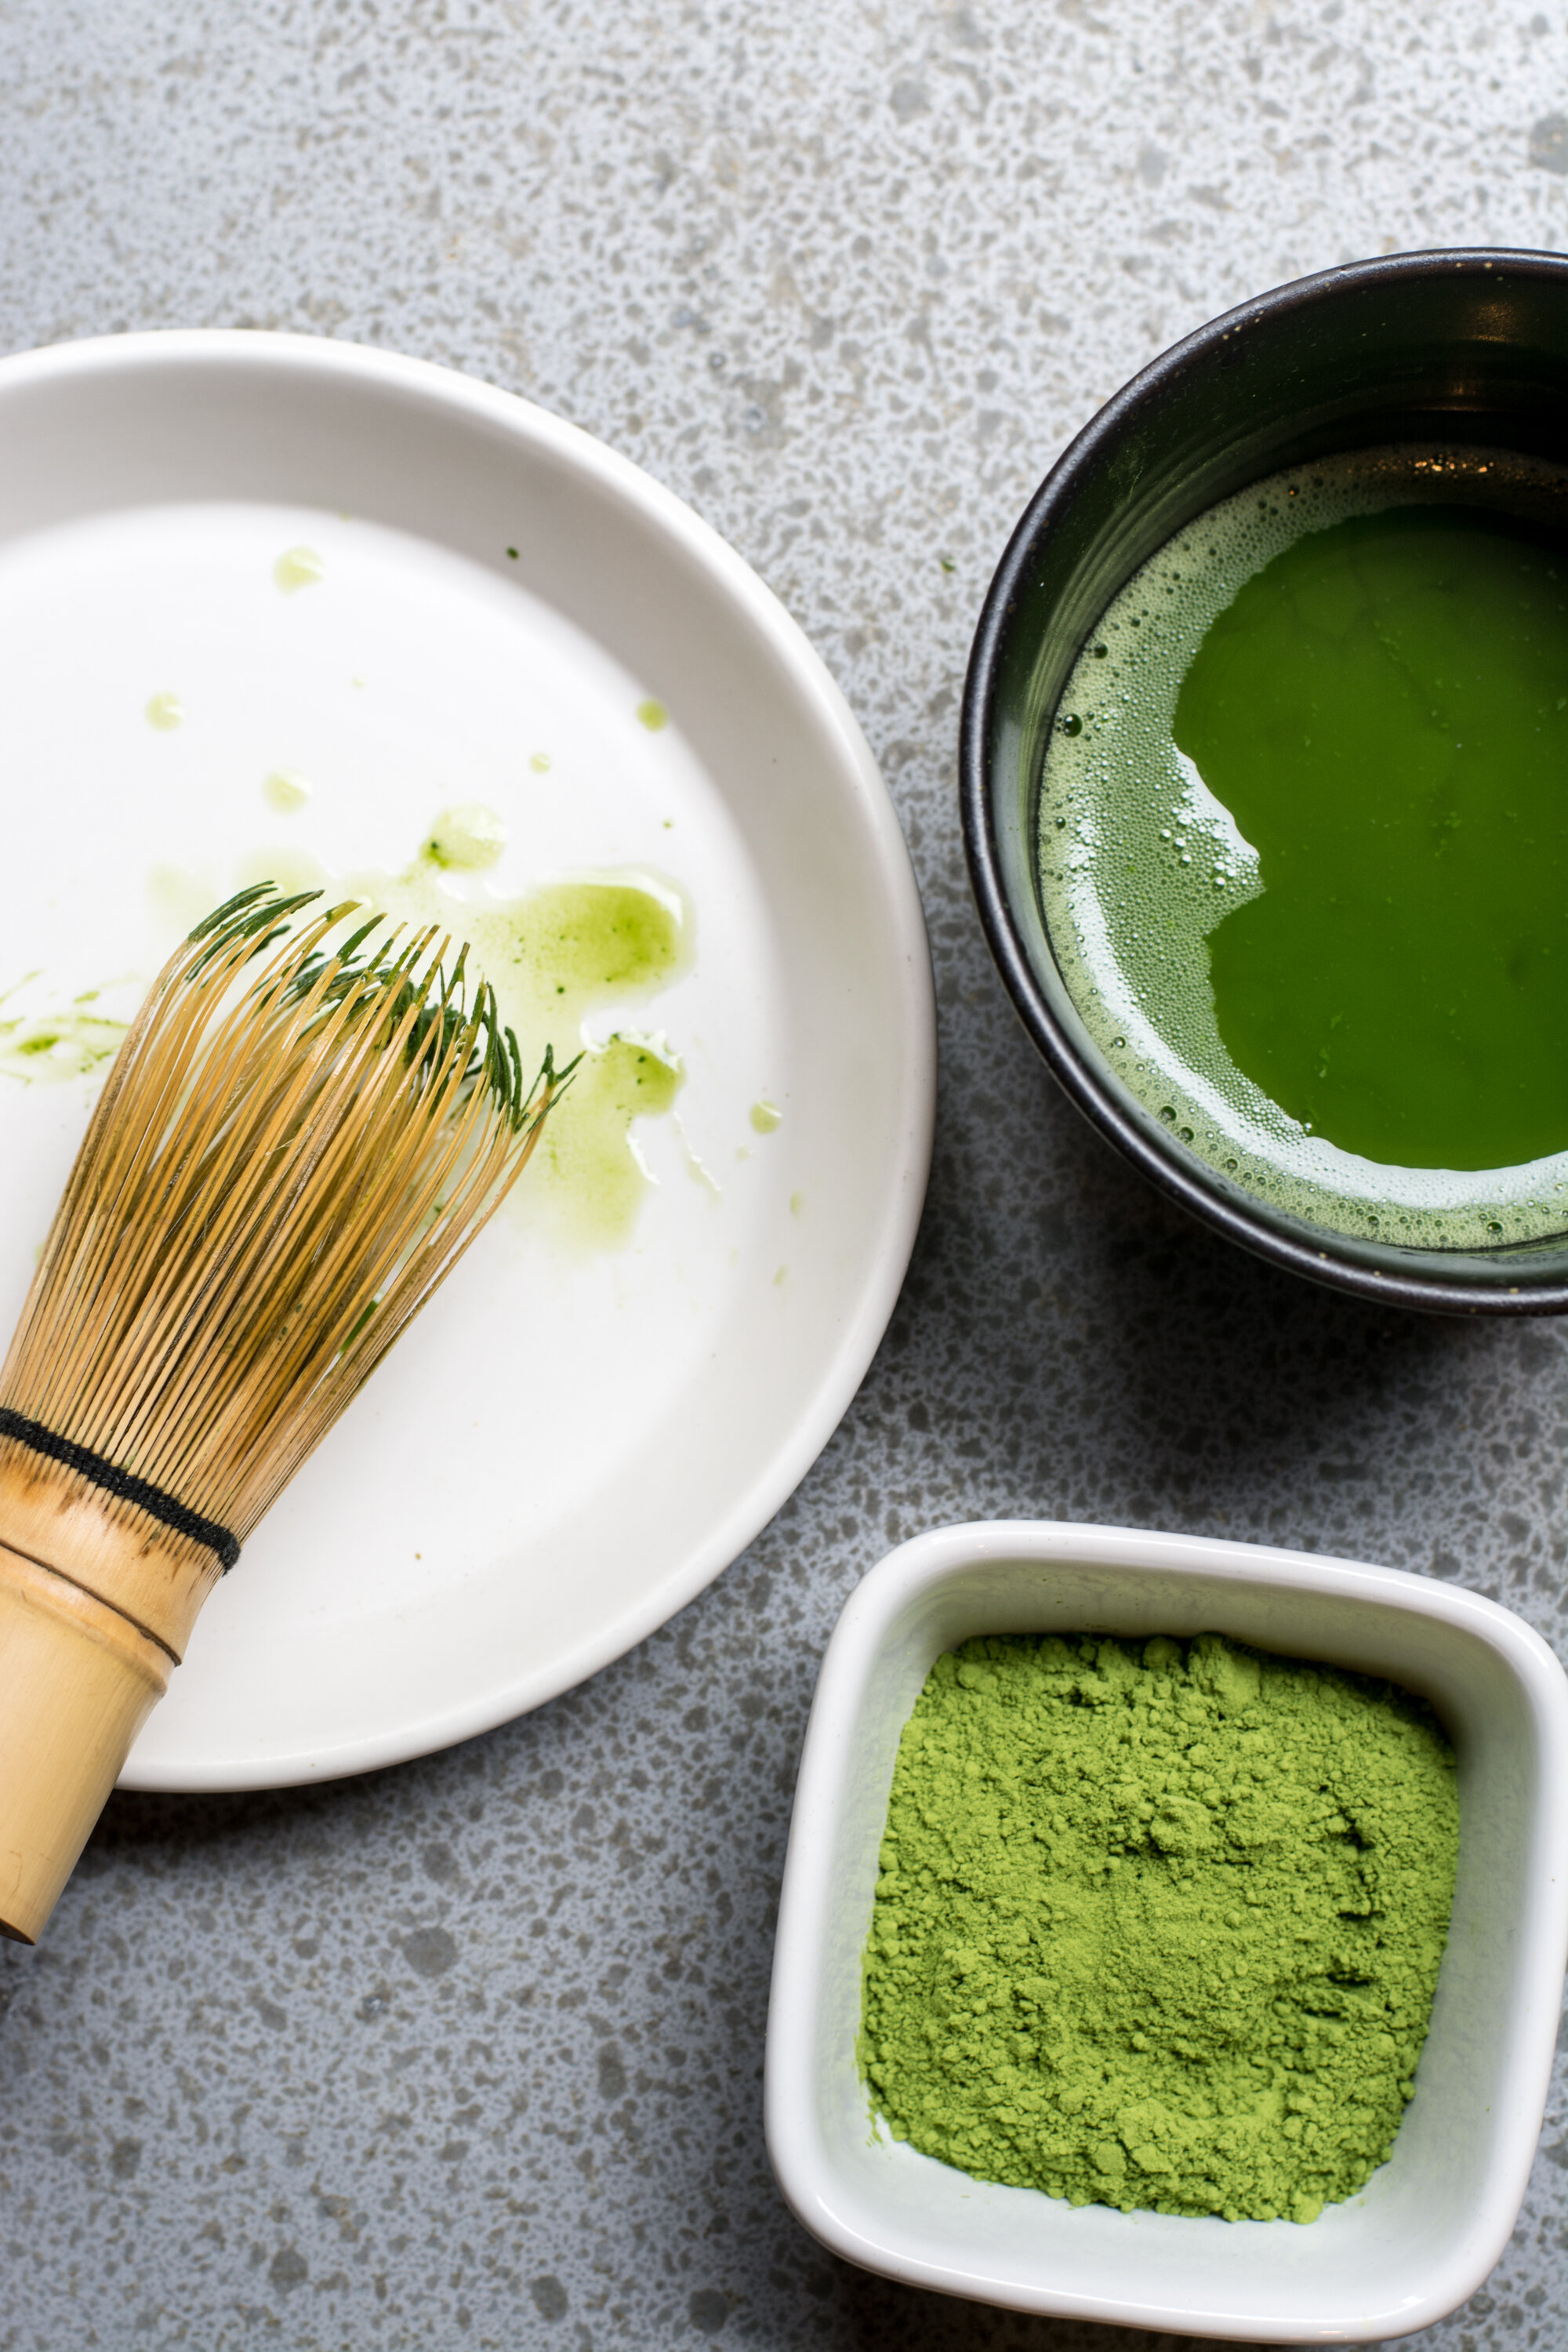 Matcha green tea is filled with antioxidants that are helpful for healing from uterine fibroids.